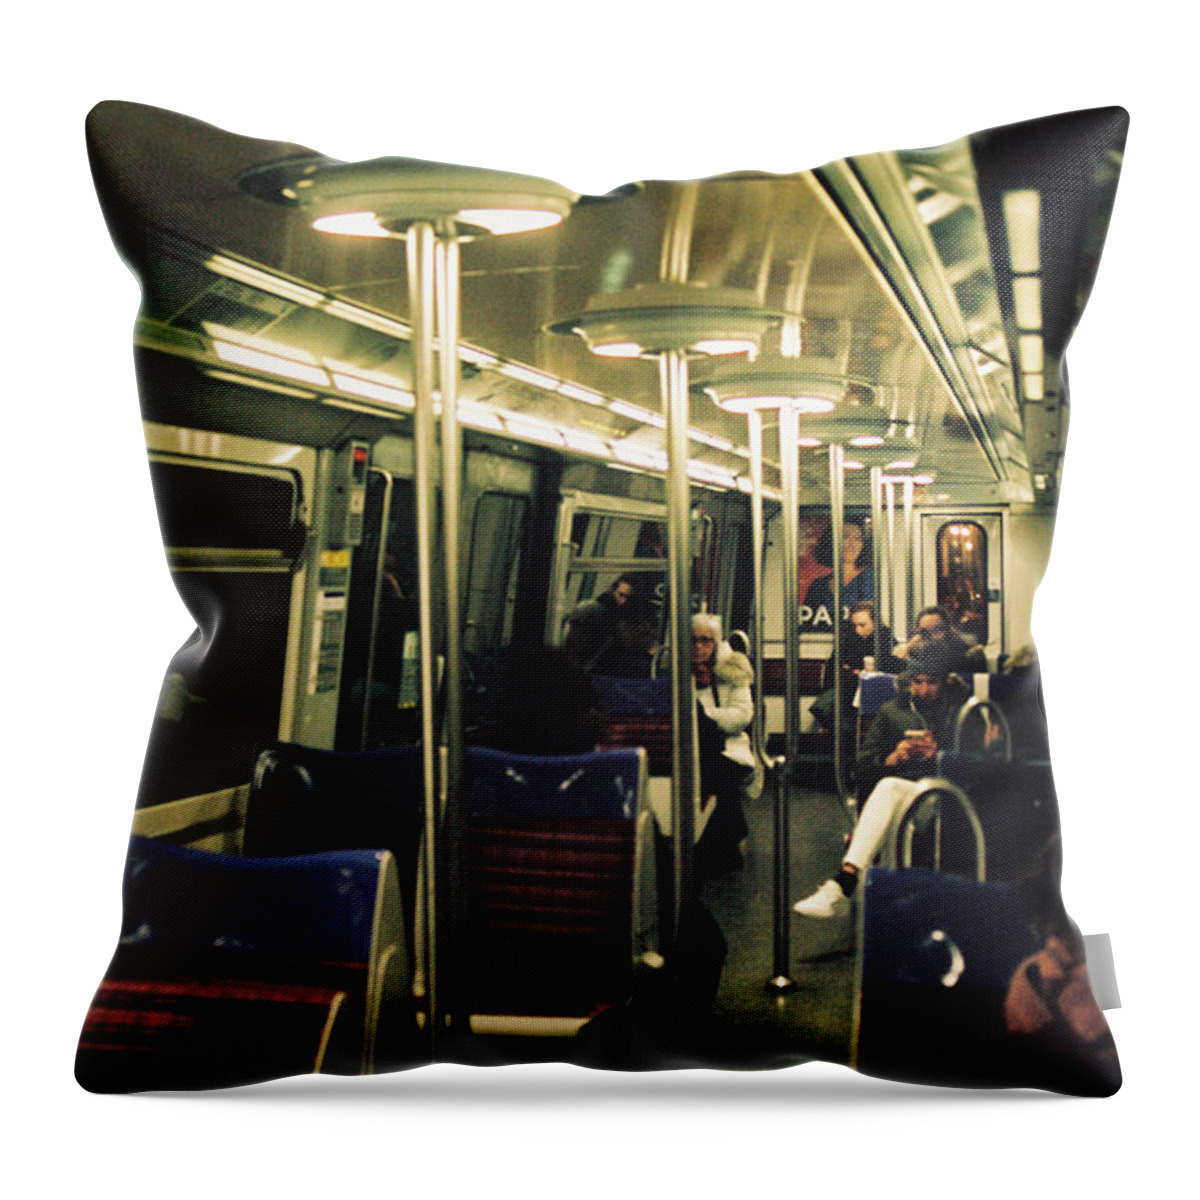 Underground Throw Pillow featuring the photograph The commute by Barthelemy De Mazenod